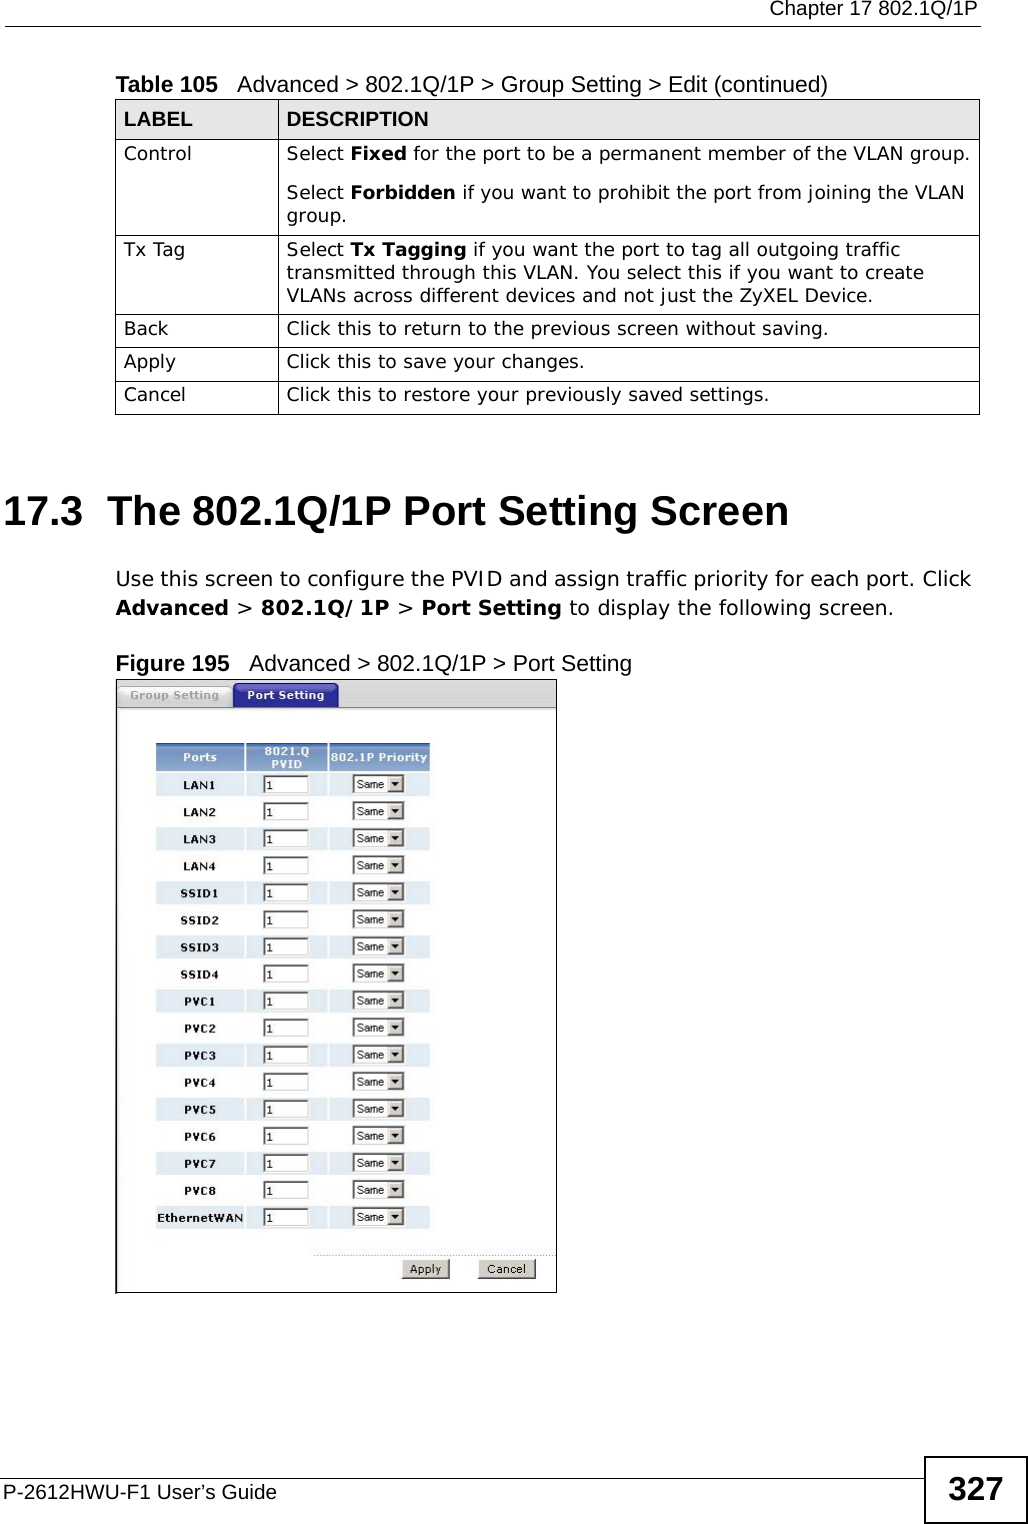  Chapter 17 802.1Q/1PP-2612HWU-F1 User’s Guide 32717.3  The 802.1Q/1P Port Setting ScreenUse this screen to configure the PVID and assign traffic priority for each port. Click Advanced &gt; 802.1Q/1P &gt; Port Setting to display the following screen.Figure 195   Advanced &gt; 802.1Q/1P &gt; Port SettingControl Select Fixed for the port to be a permanent member of the VLAN group.Select Forbidden if you want to prohibit the port from joining the VLAN group.Tx Tag Select Tx Tagging if you want the port to tag all outgoing traffic transmitted through this VLAN. You select this if you want to create VLANs across different devices and not just the ZyXEL Device.Back Click this to return to the previous screen without saving.Apply Click this to save your changes.Cancel Click this to restore your previously saved settings.Table 105   Advanced &gt; 802.1Q/1P &gt; Group Setting &gt; Edit (continued)LABEL DESCRIPTION